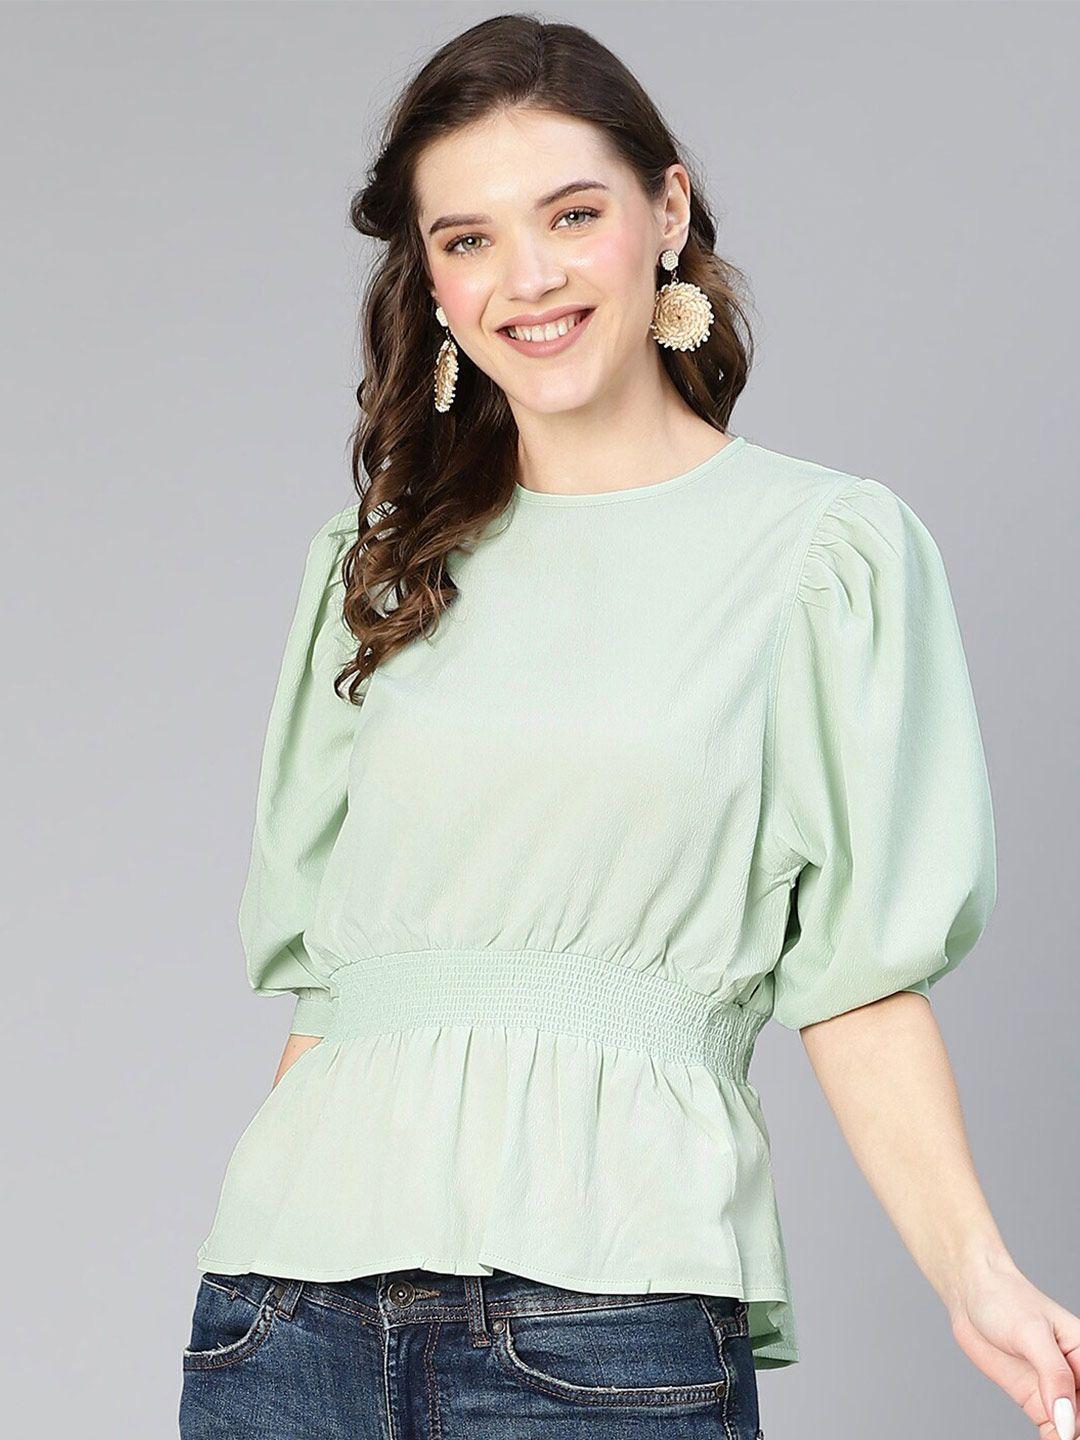 oxolloxo cinched waist puff sleeves top